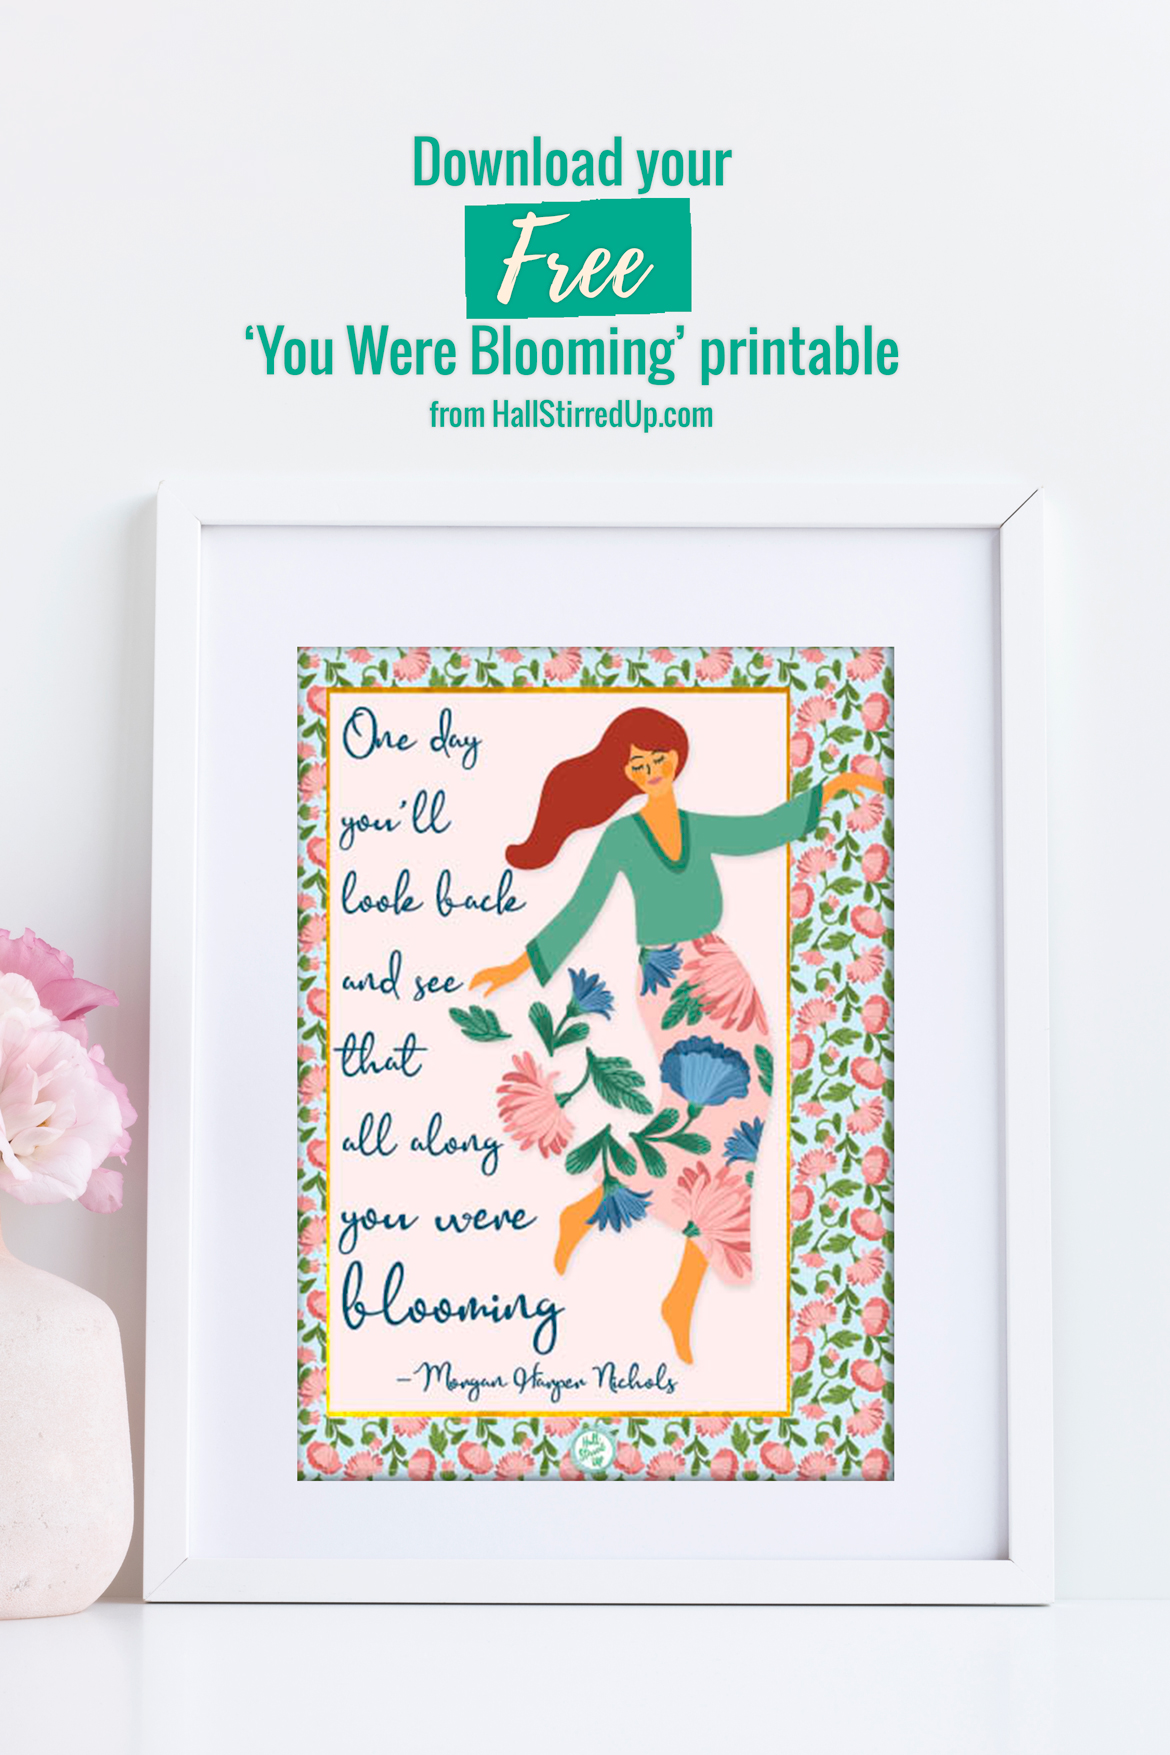 You are blooming Favorite Bloom quotes and a pretty printable and bonus